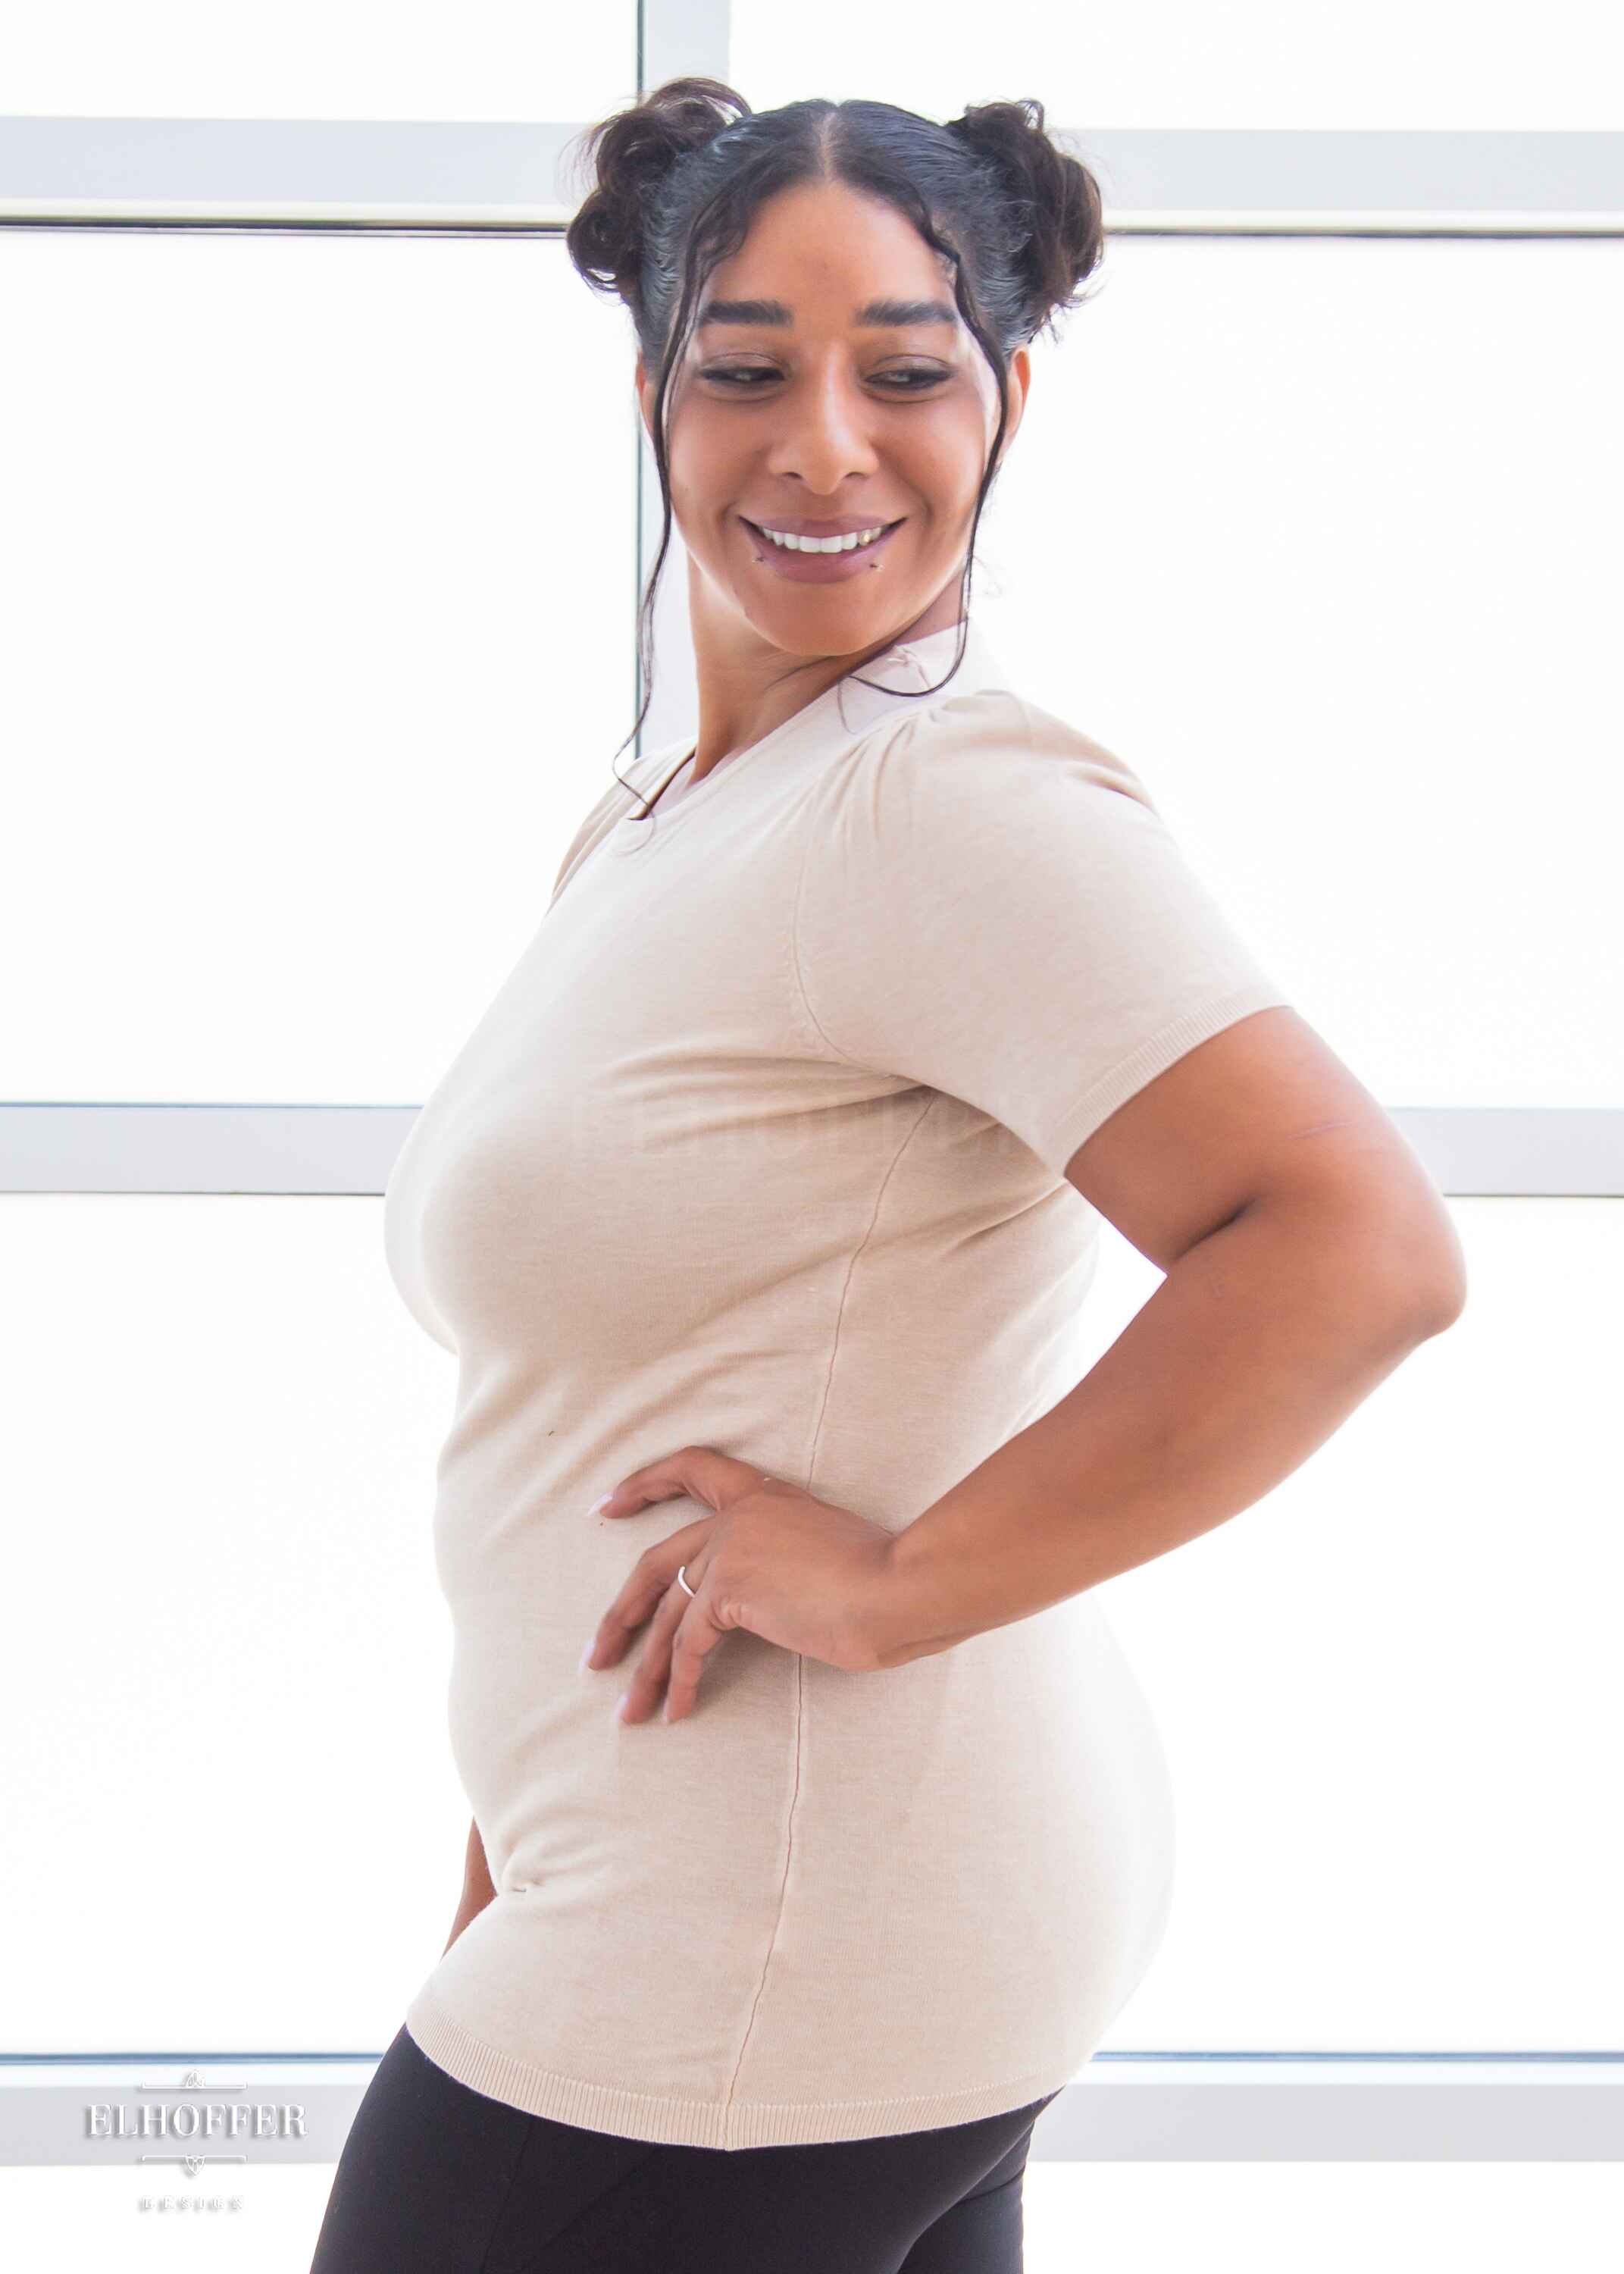 A side view of Janae, a light brown skinned L model with dark hair in space buns, smiling while wearing a short sleeve light weight off white knit top. The top hits about mid hip in length and the sleeves have pleated gathering at the shoulders.